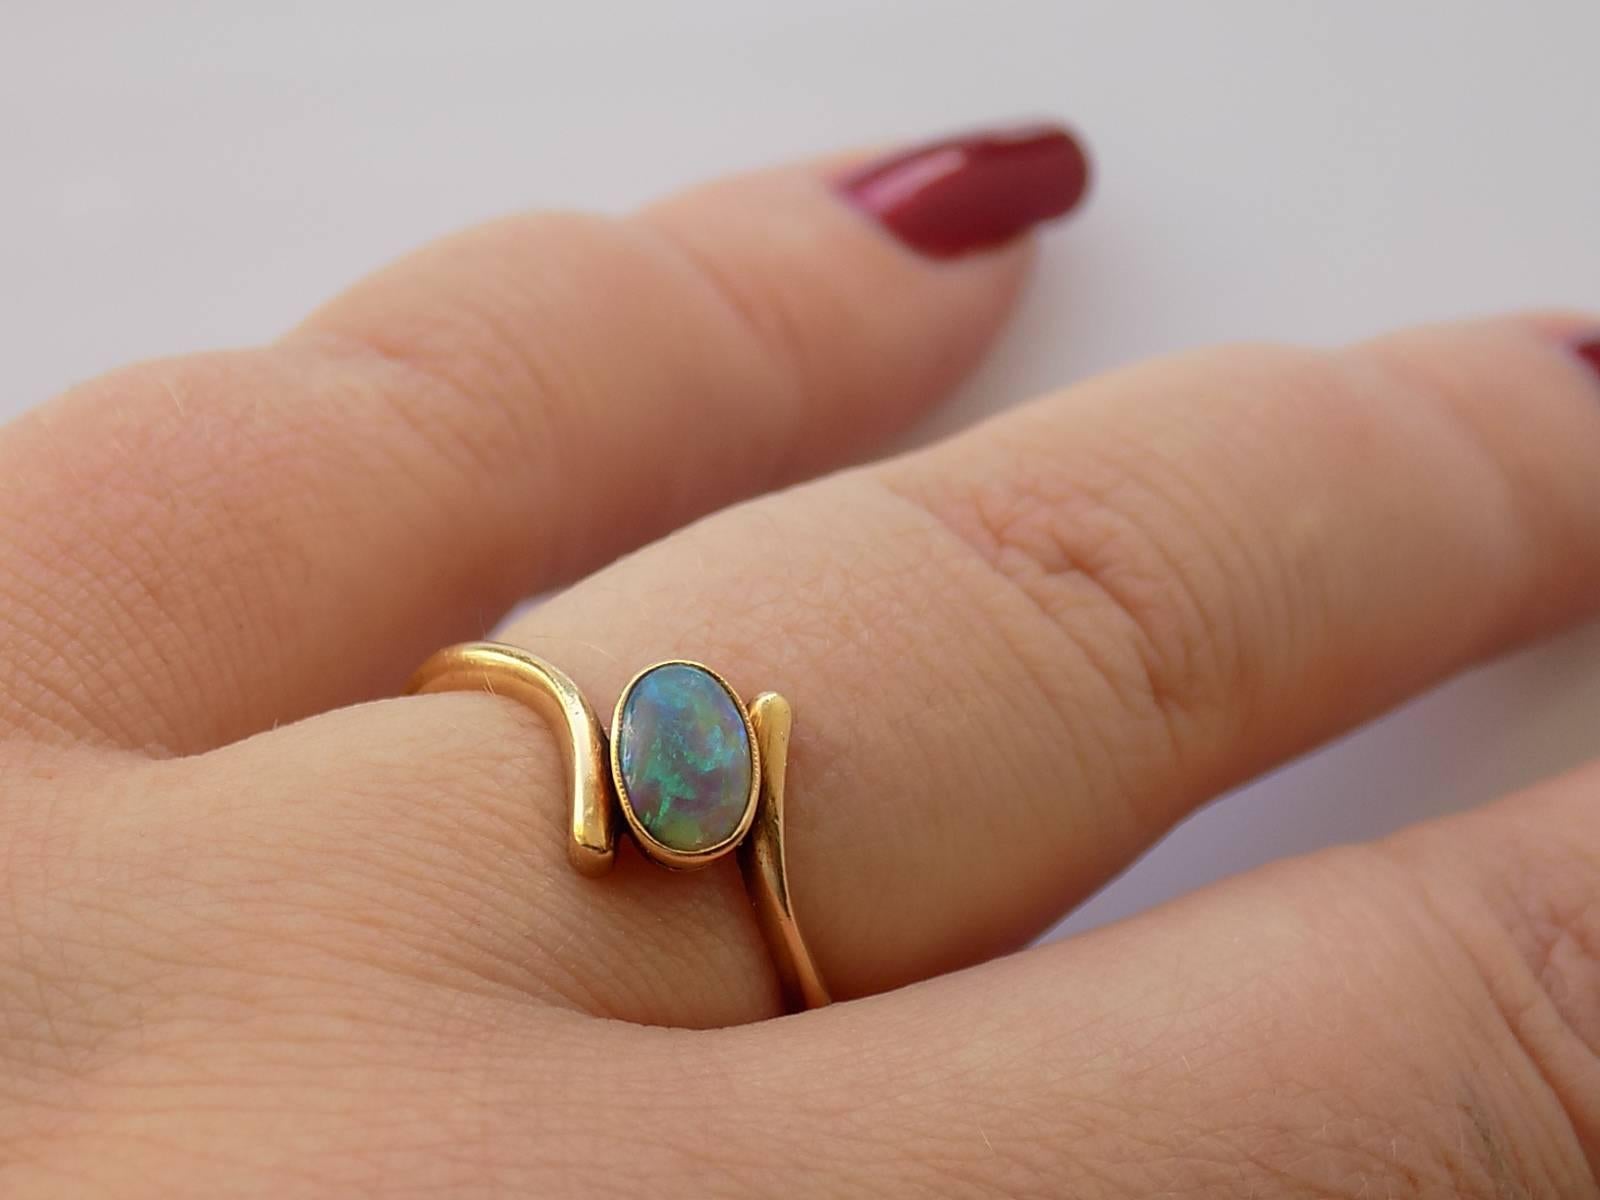 A Lovely Victorian 18 Carat Gold and solid Australian Black Opal ring. Opal are beautiful colour with a lots of green and blue splashes. English origin.
Size Q UK, 8.5 US
Opal 7mm x 5mm.